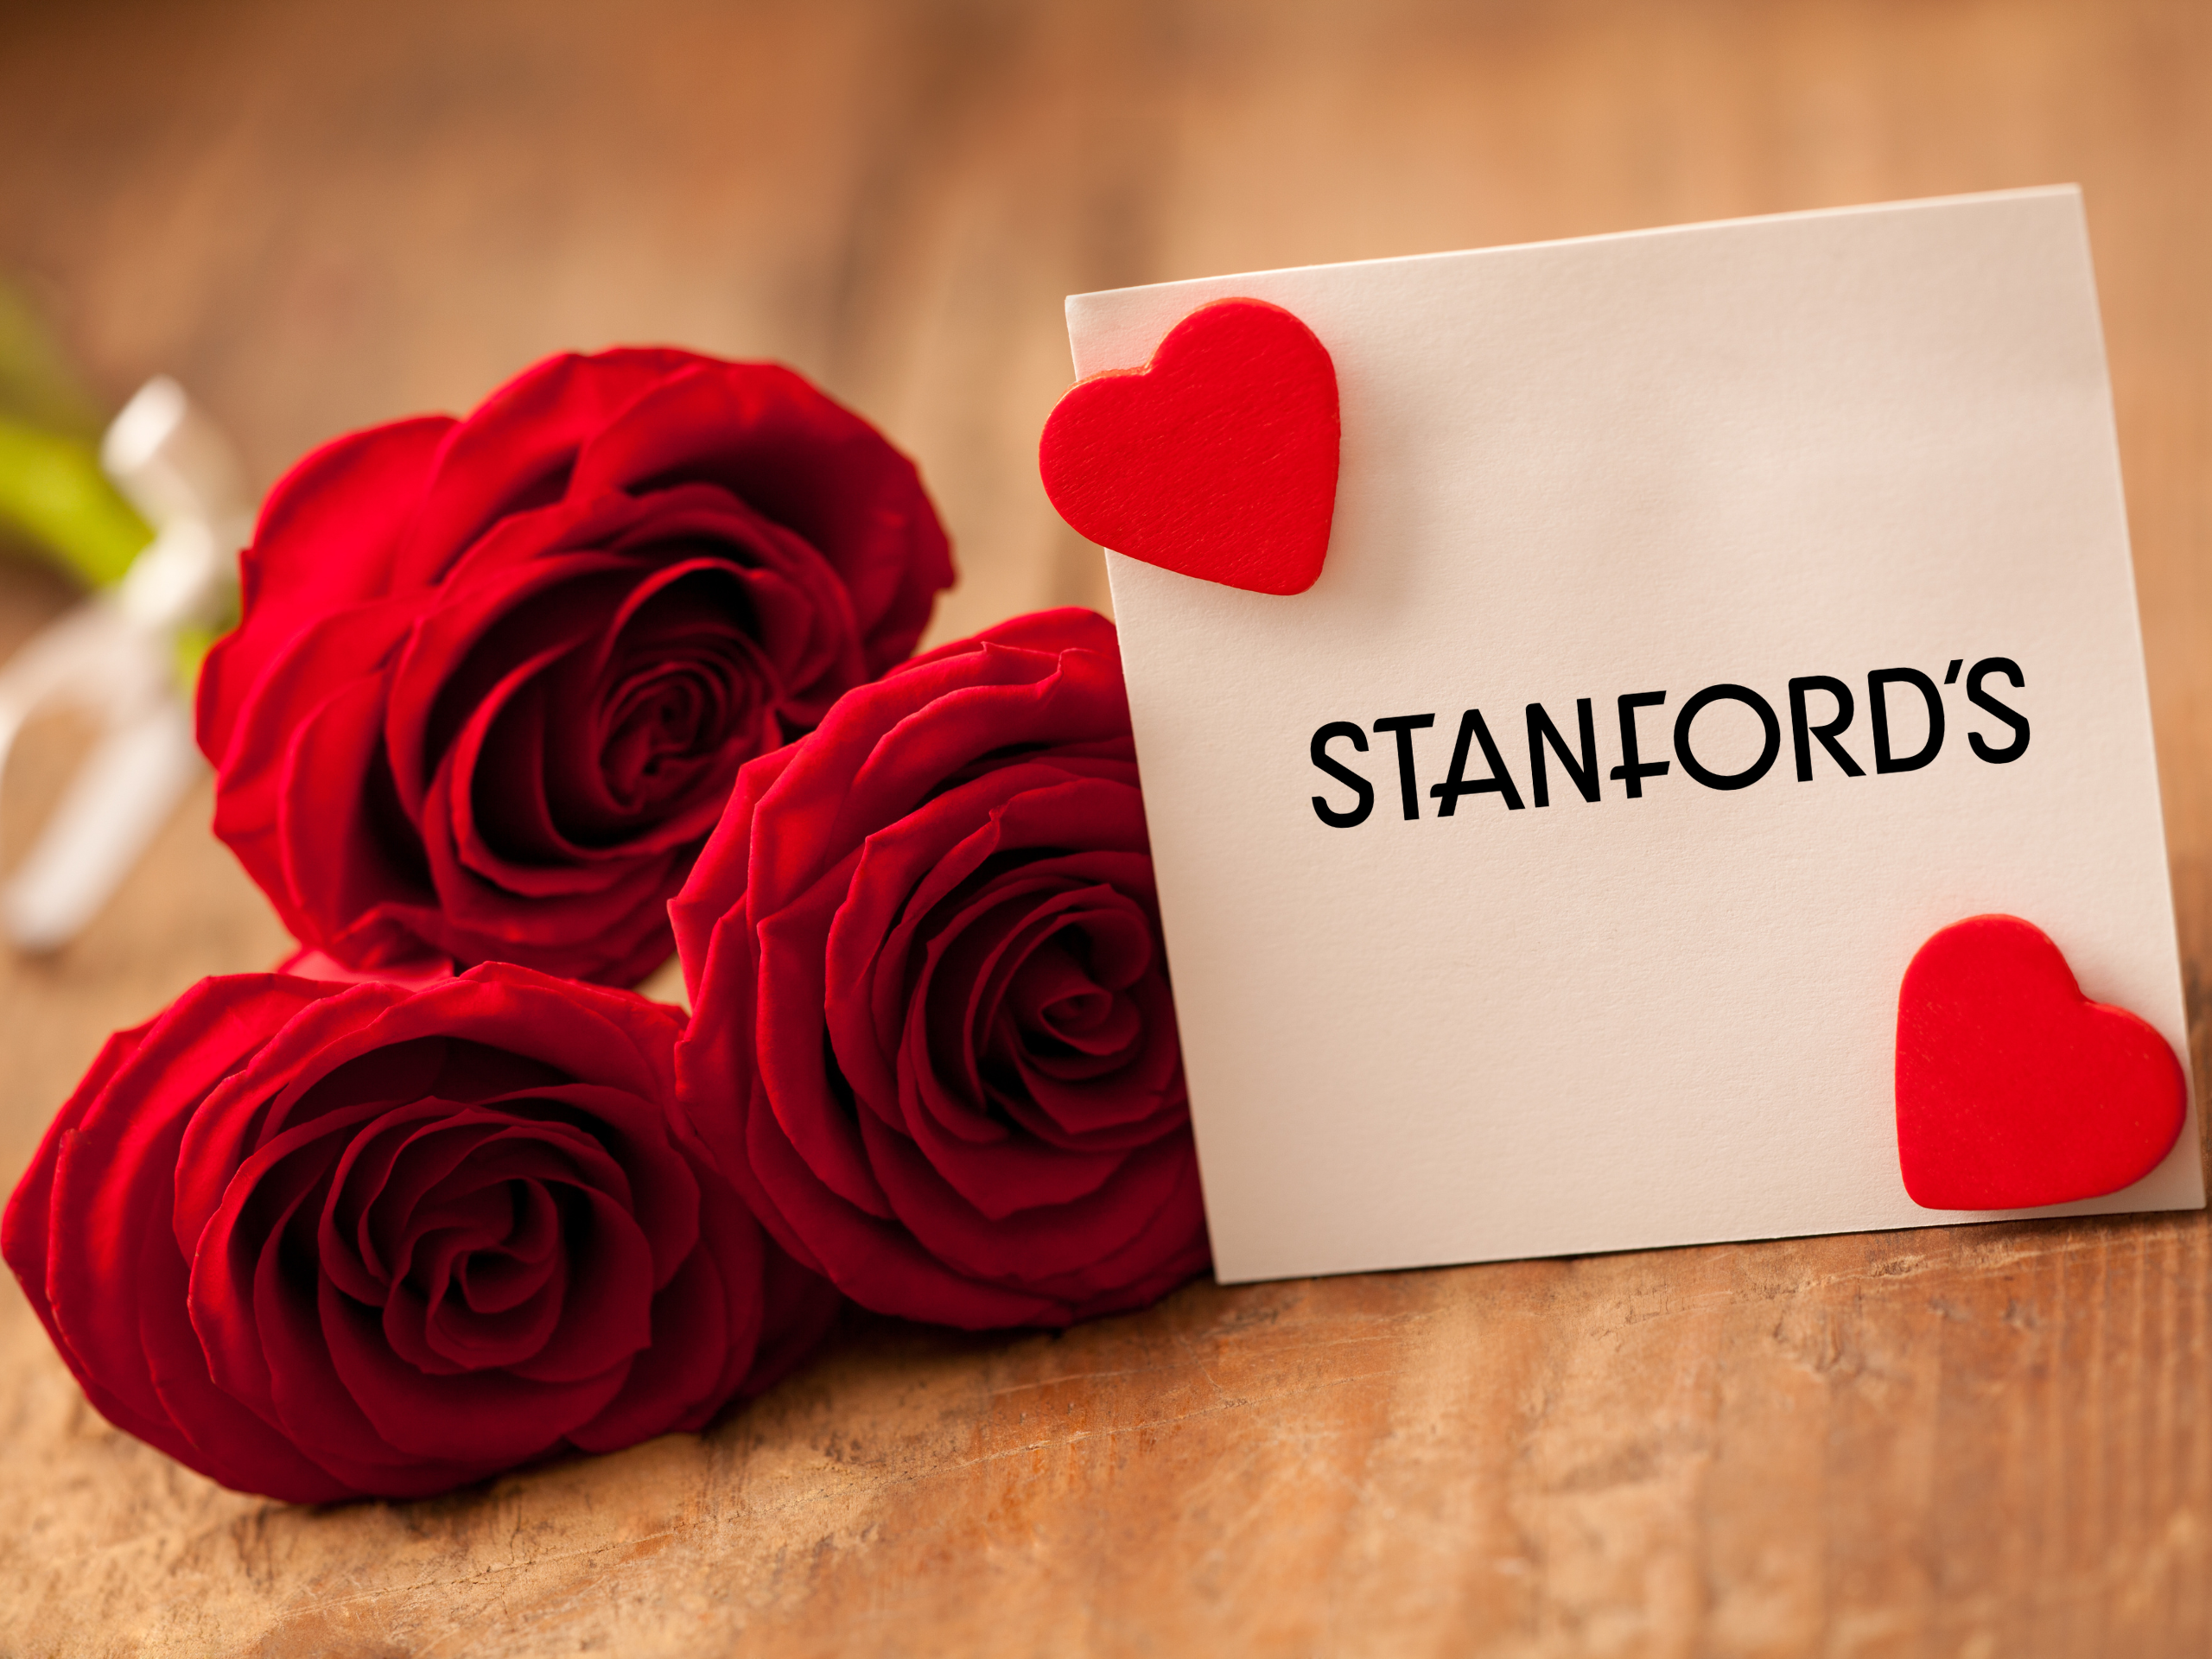 Steakhouse Valentine's Day event roses and card labeled Stanfords